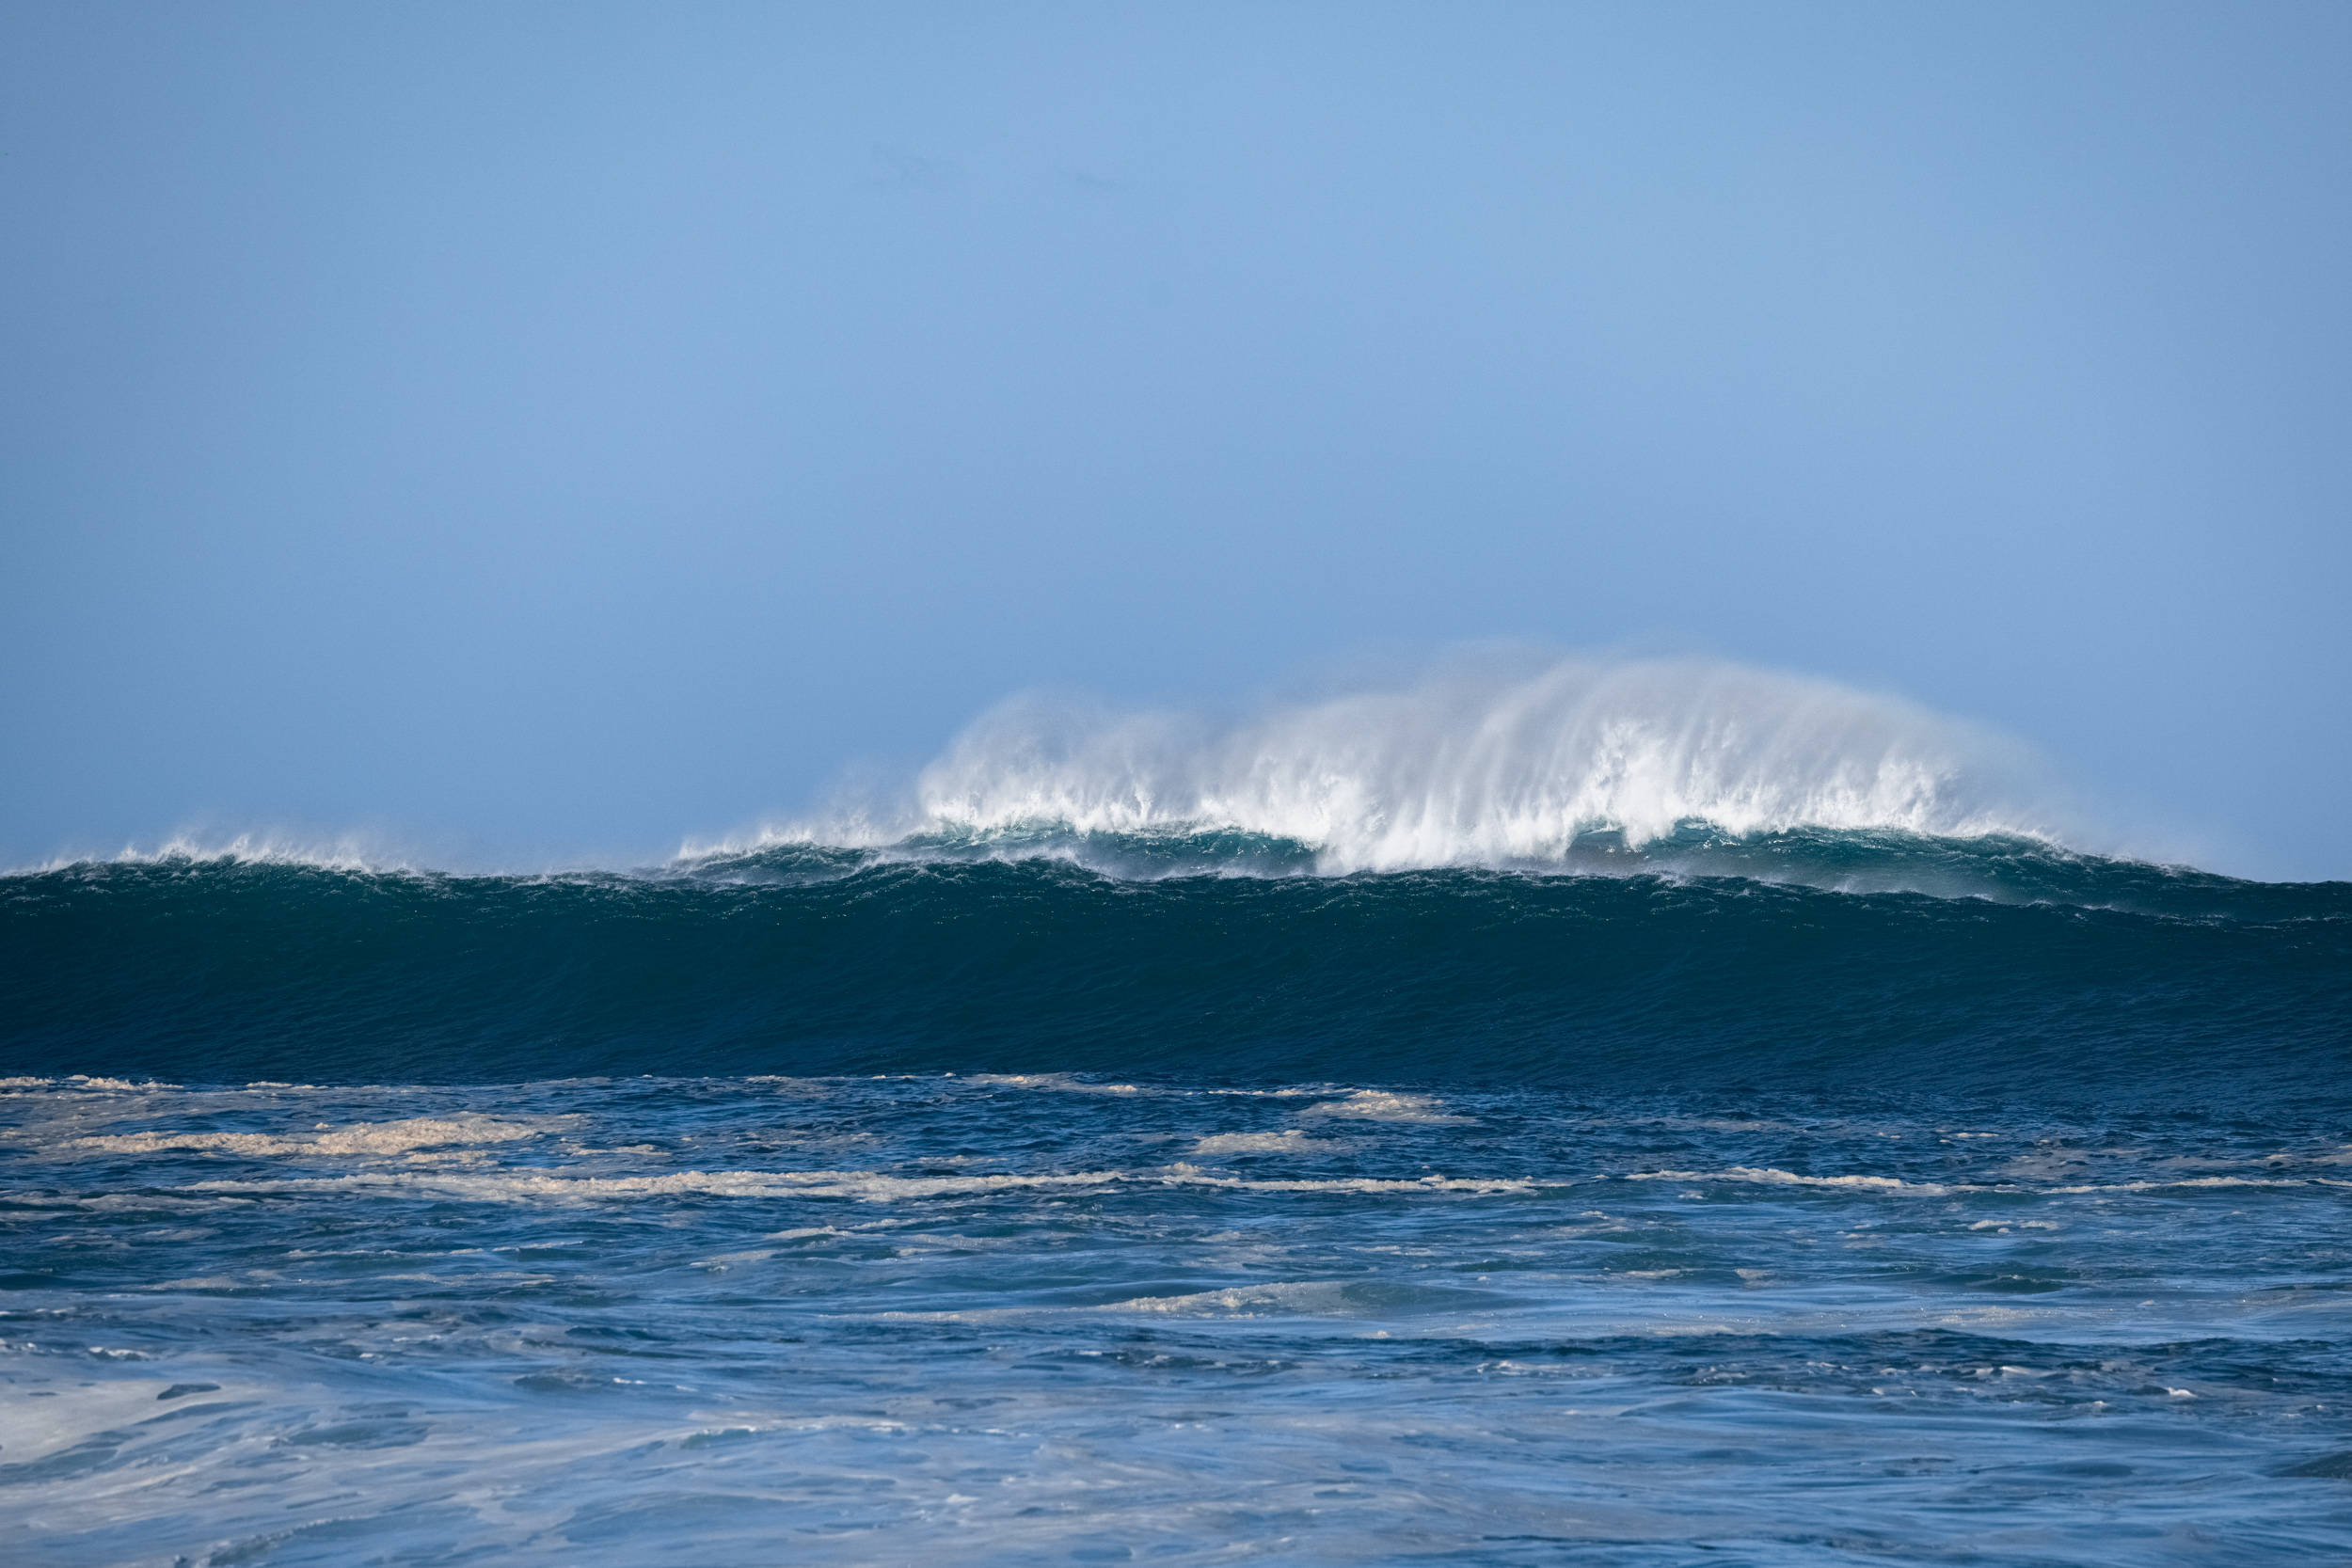 Caught this wave yesterday at North Shore! Last big swell of the